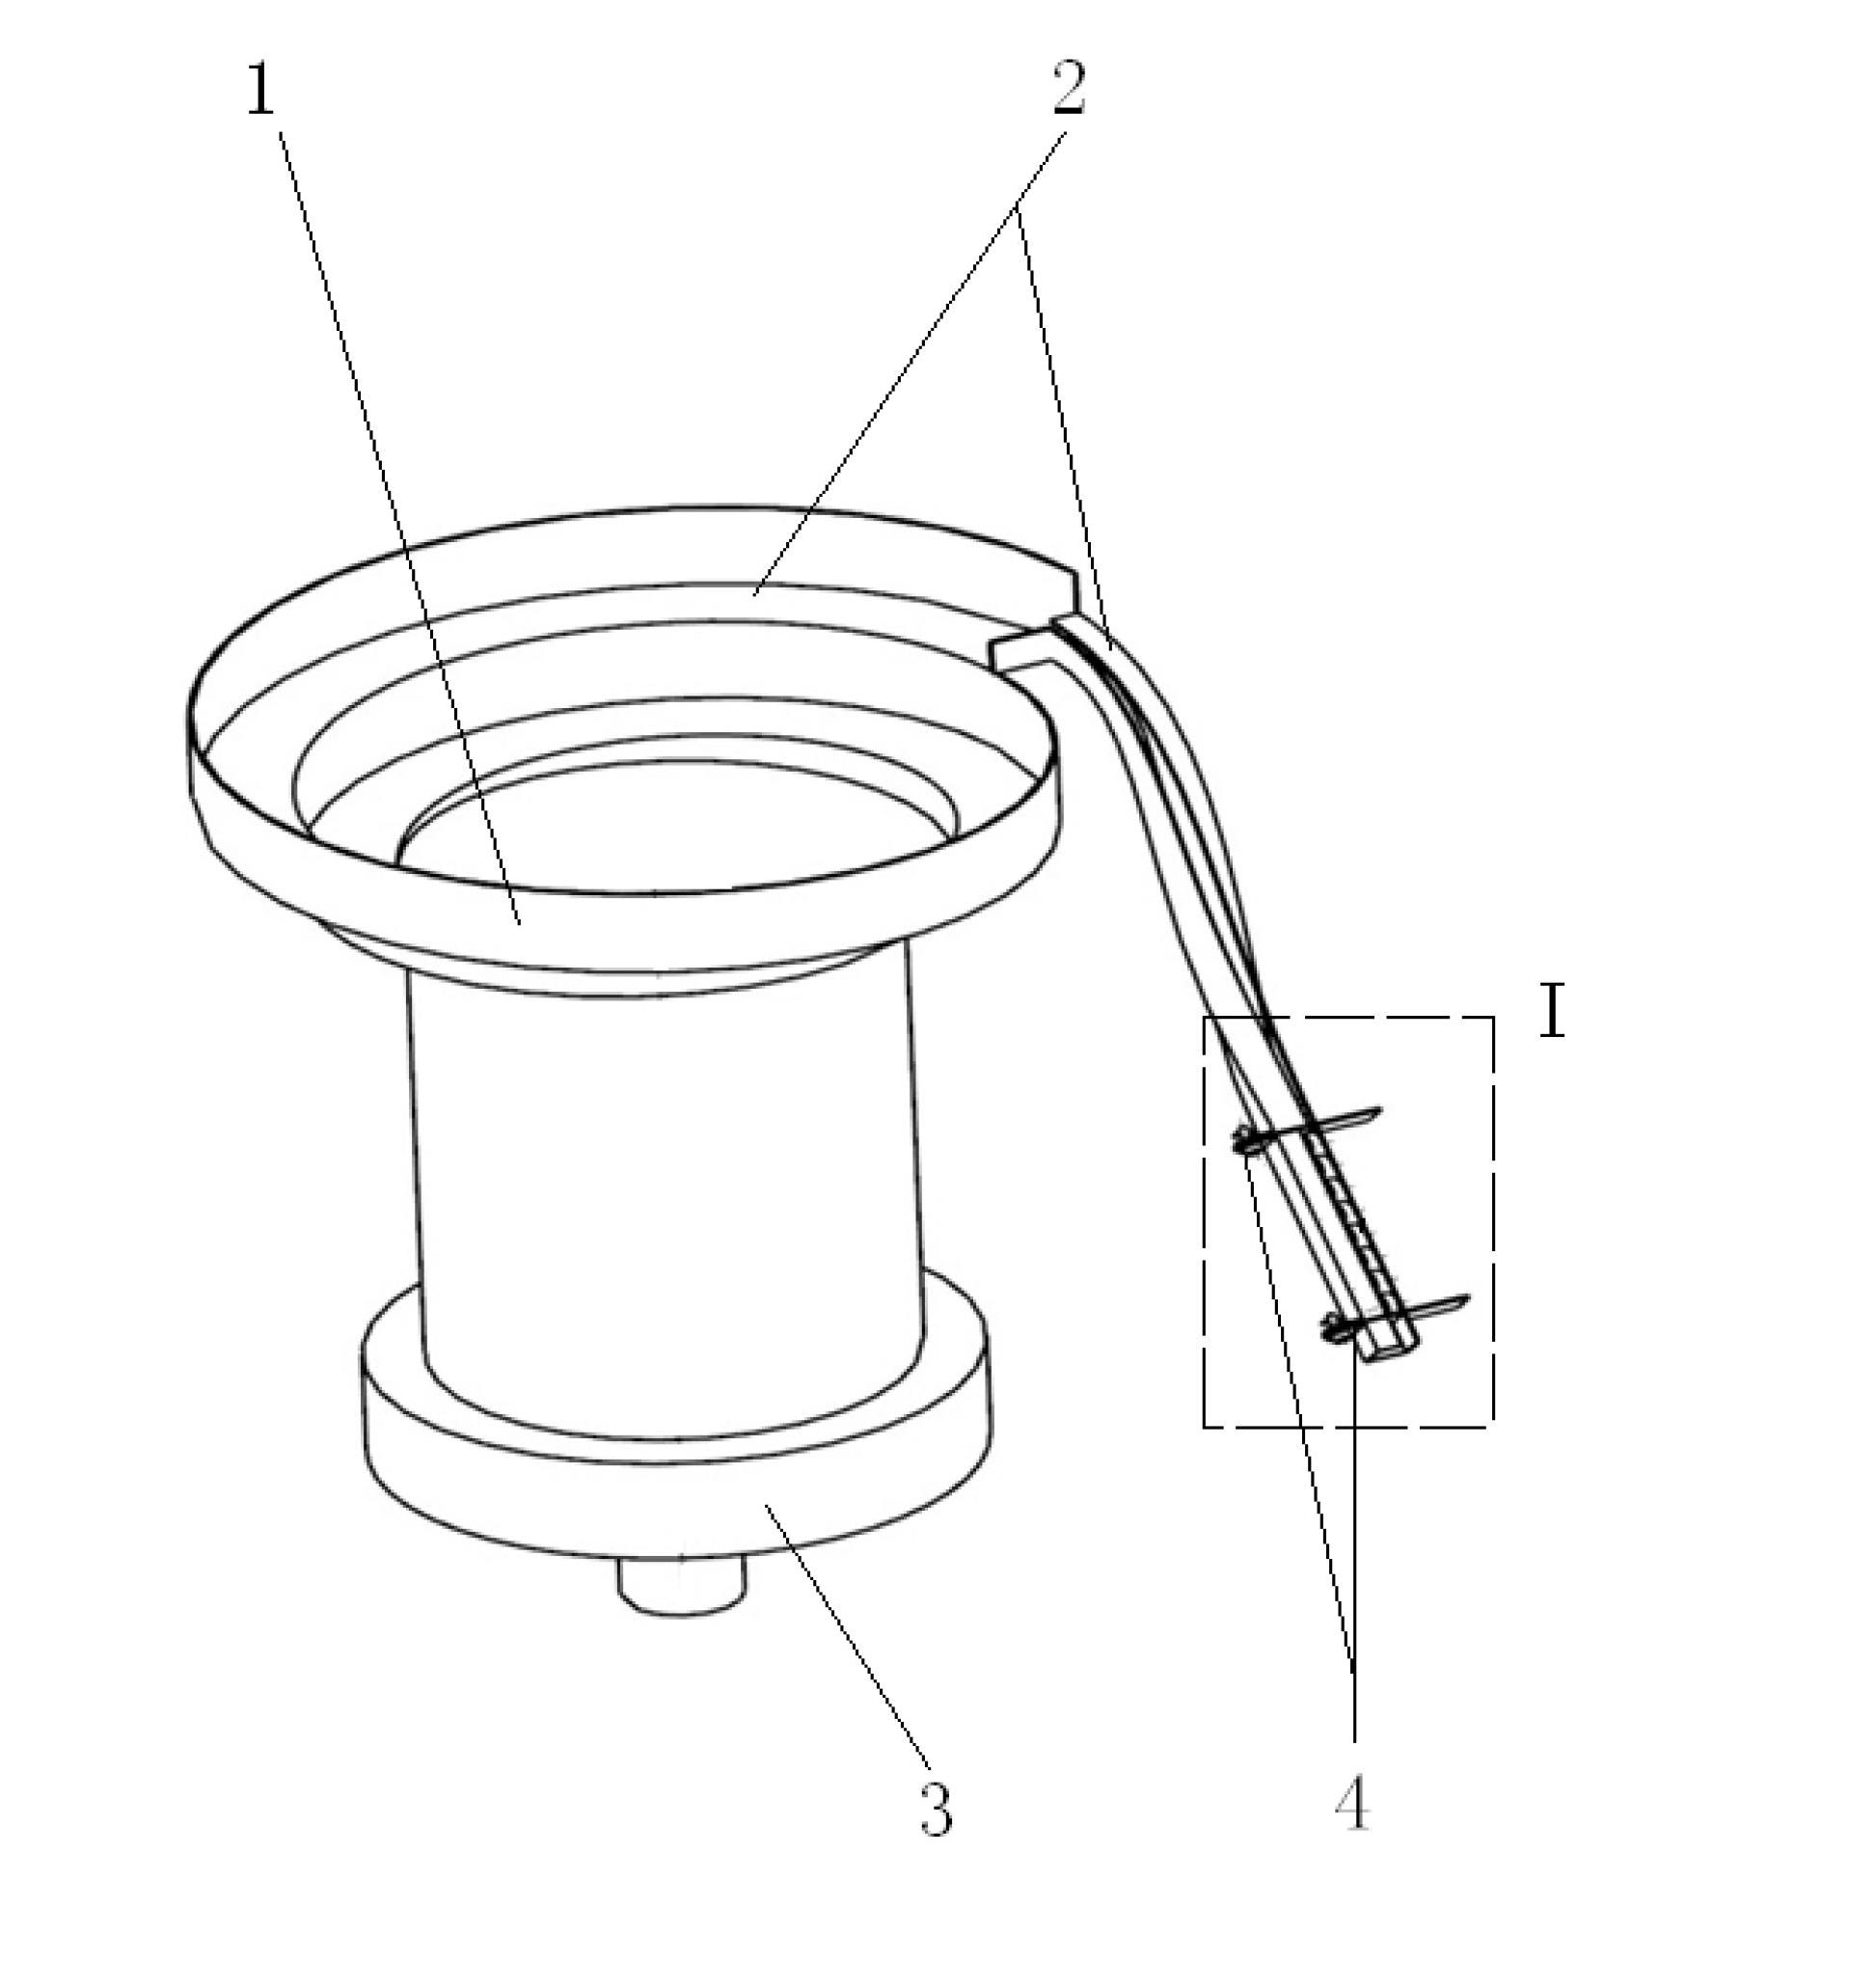 Vibration sieve for reducing omitted mounting of inserts of products